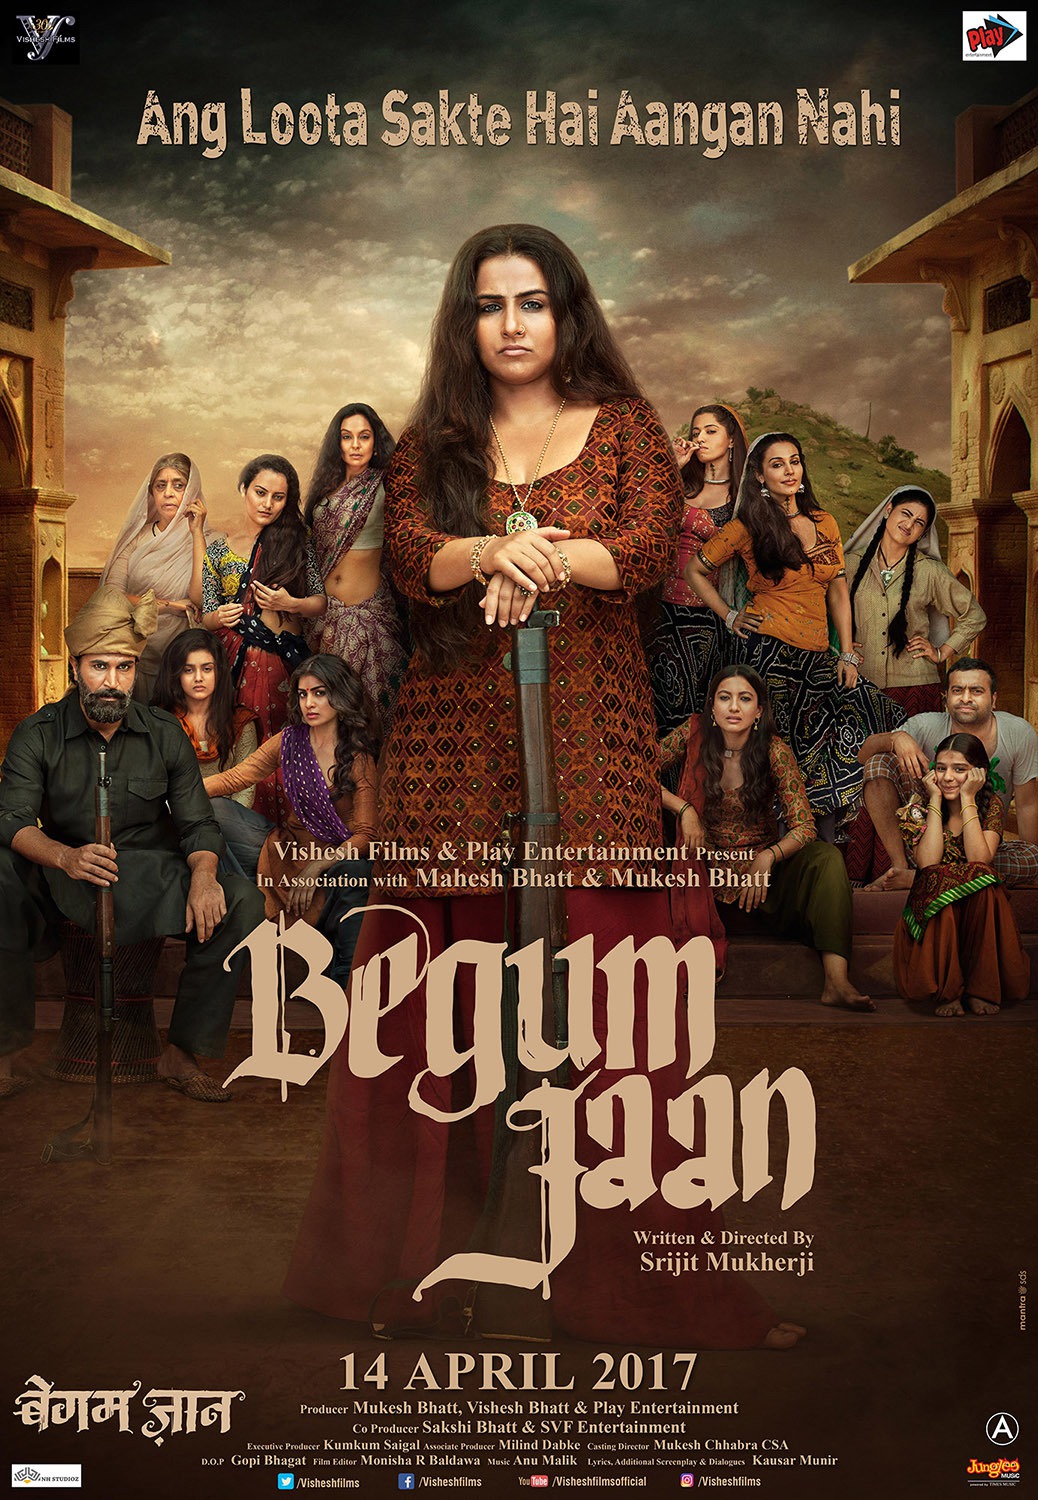 Extra Large Movie Poster Image for Begum Jaan (#3 of 3)